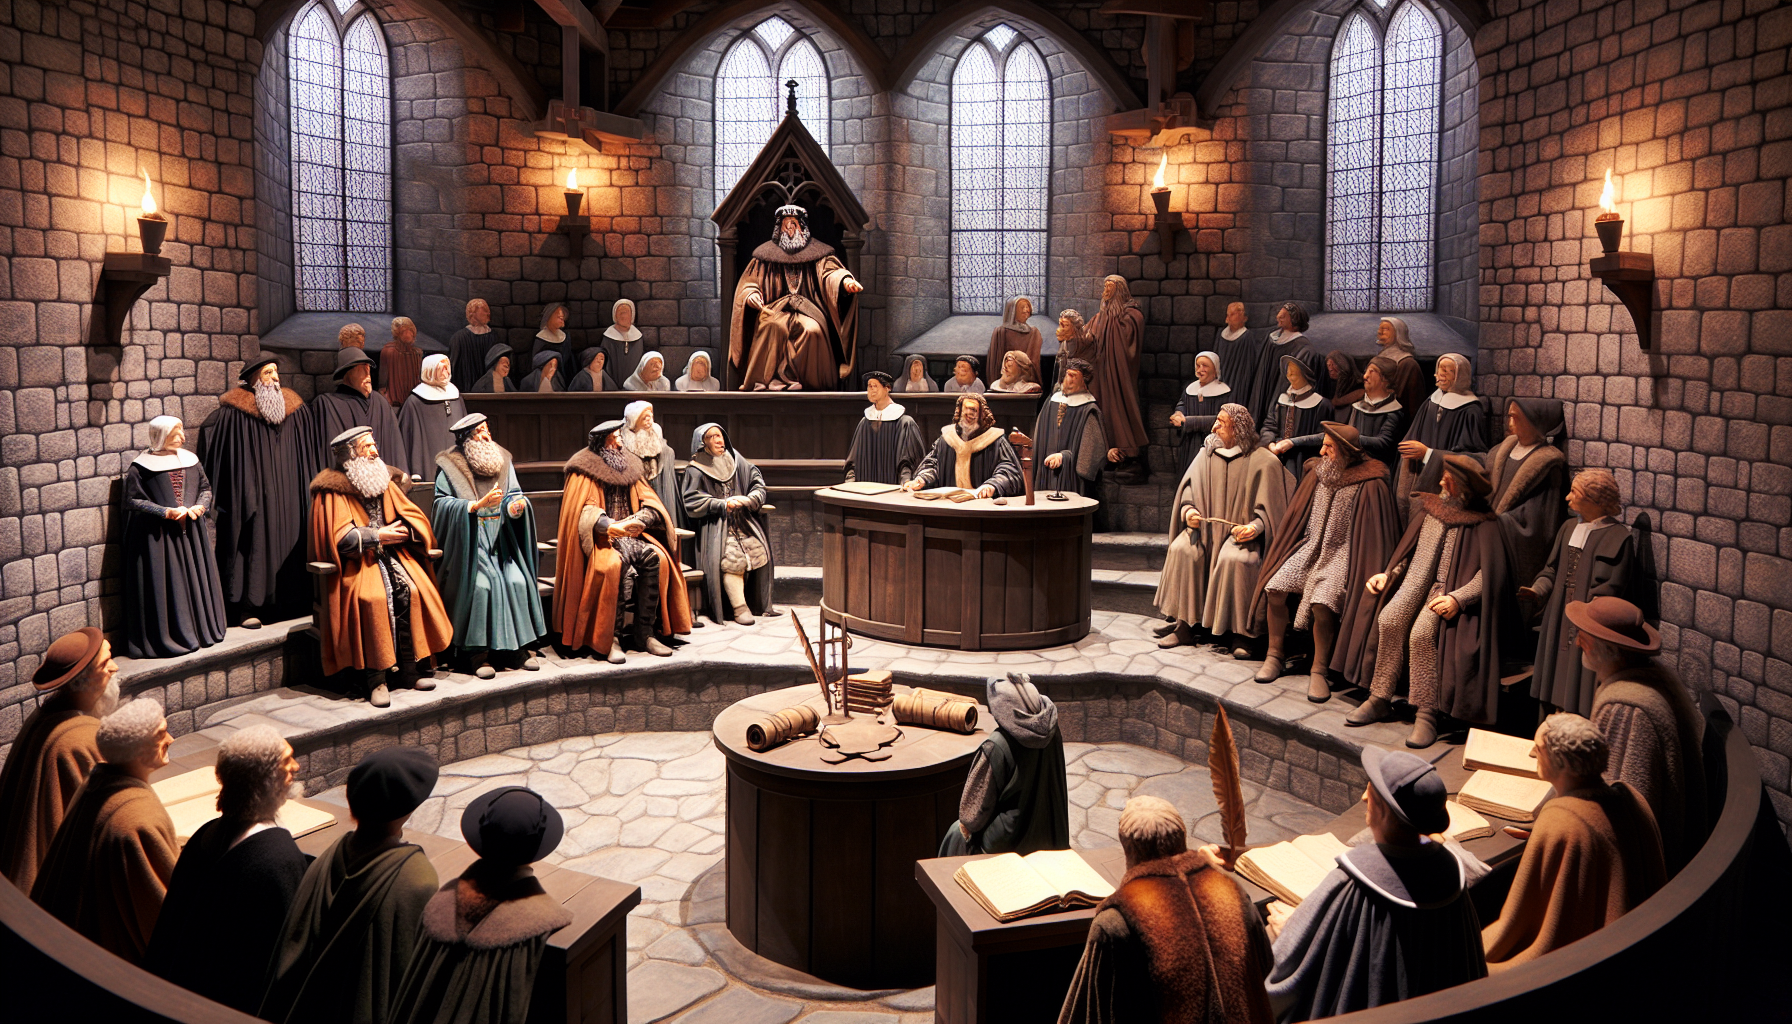 Medieval court with judges and lawyers discussing common law rights